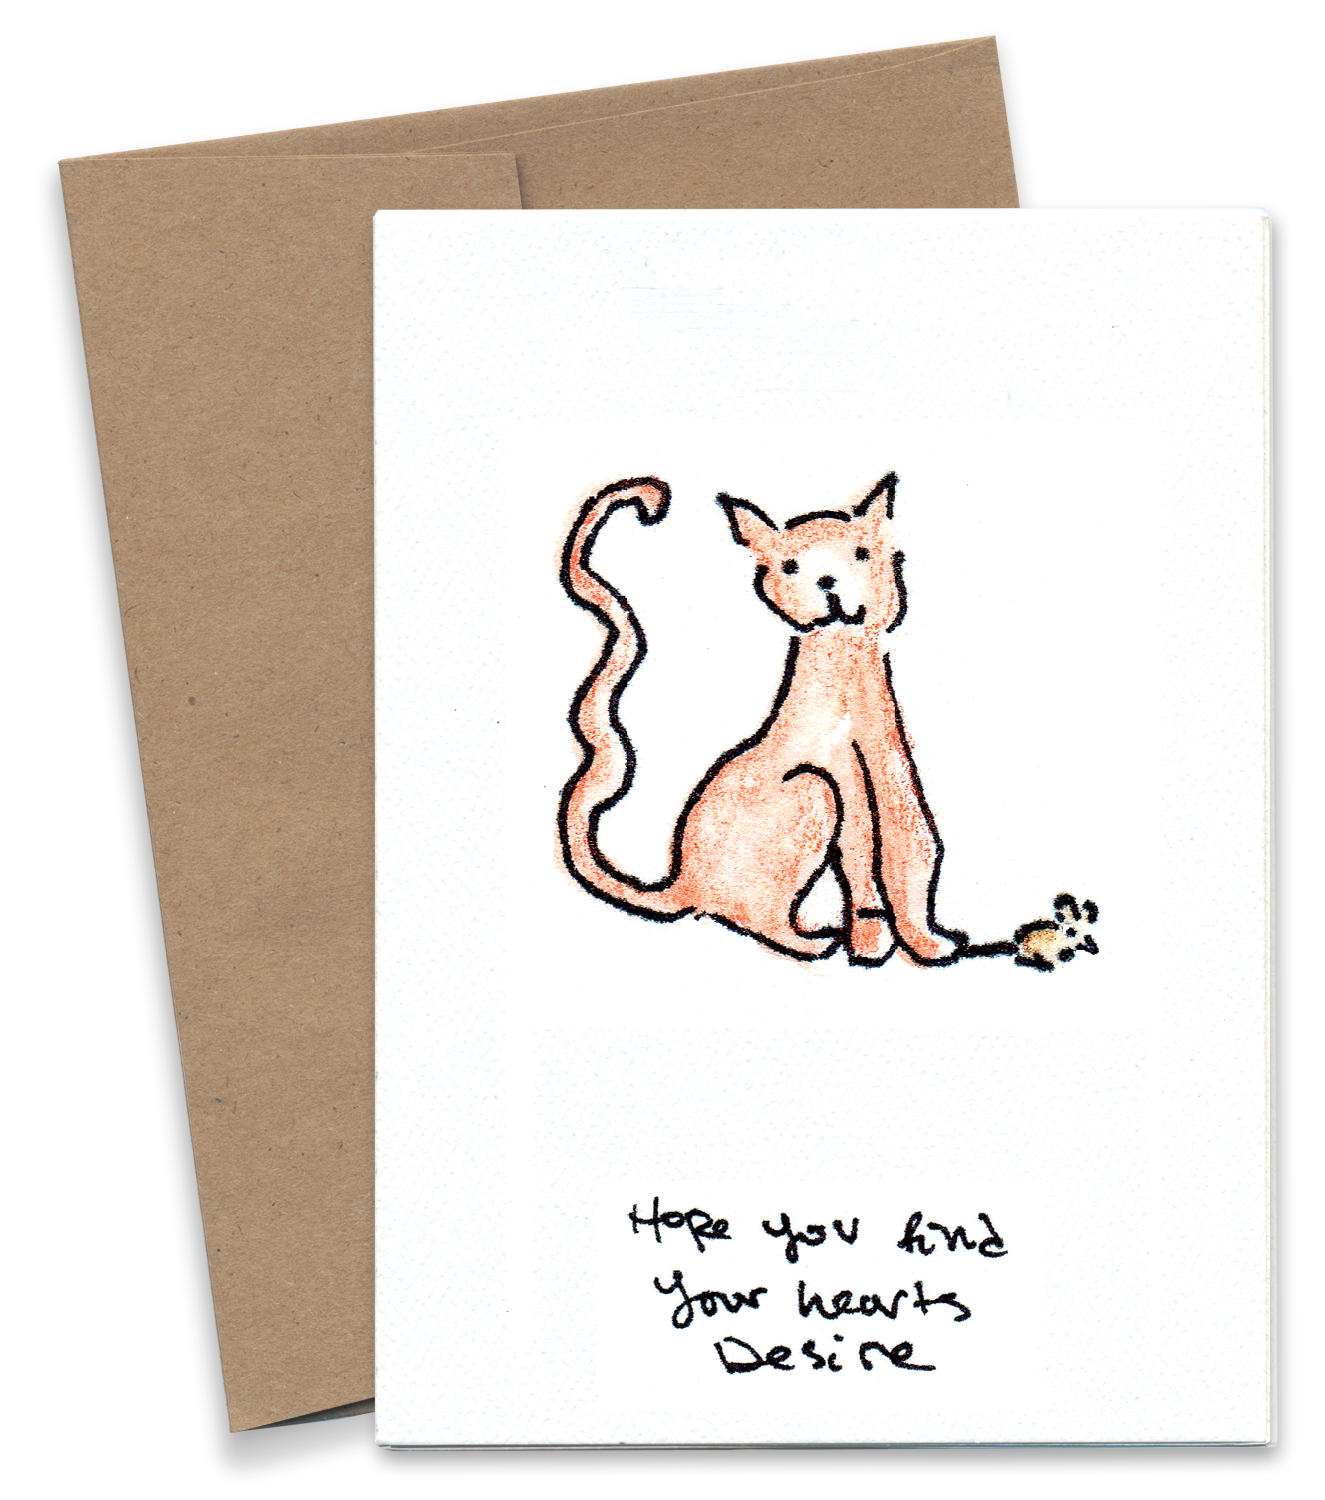 Hope You Find Your Hearts Desire (Cat)